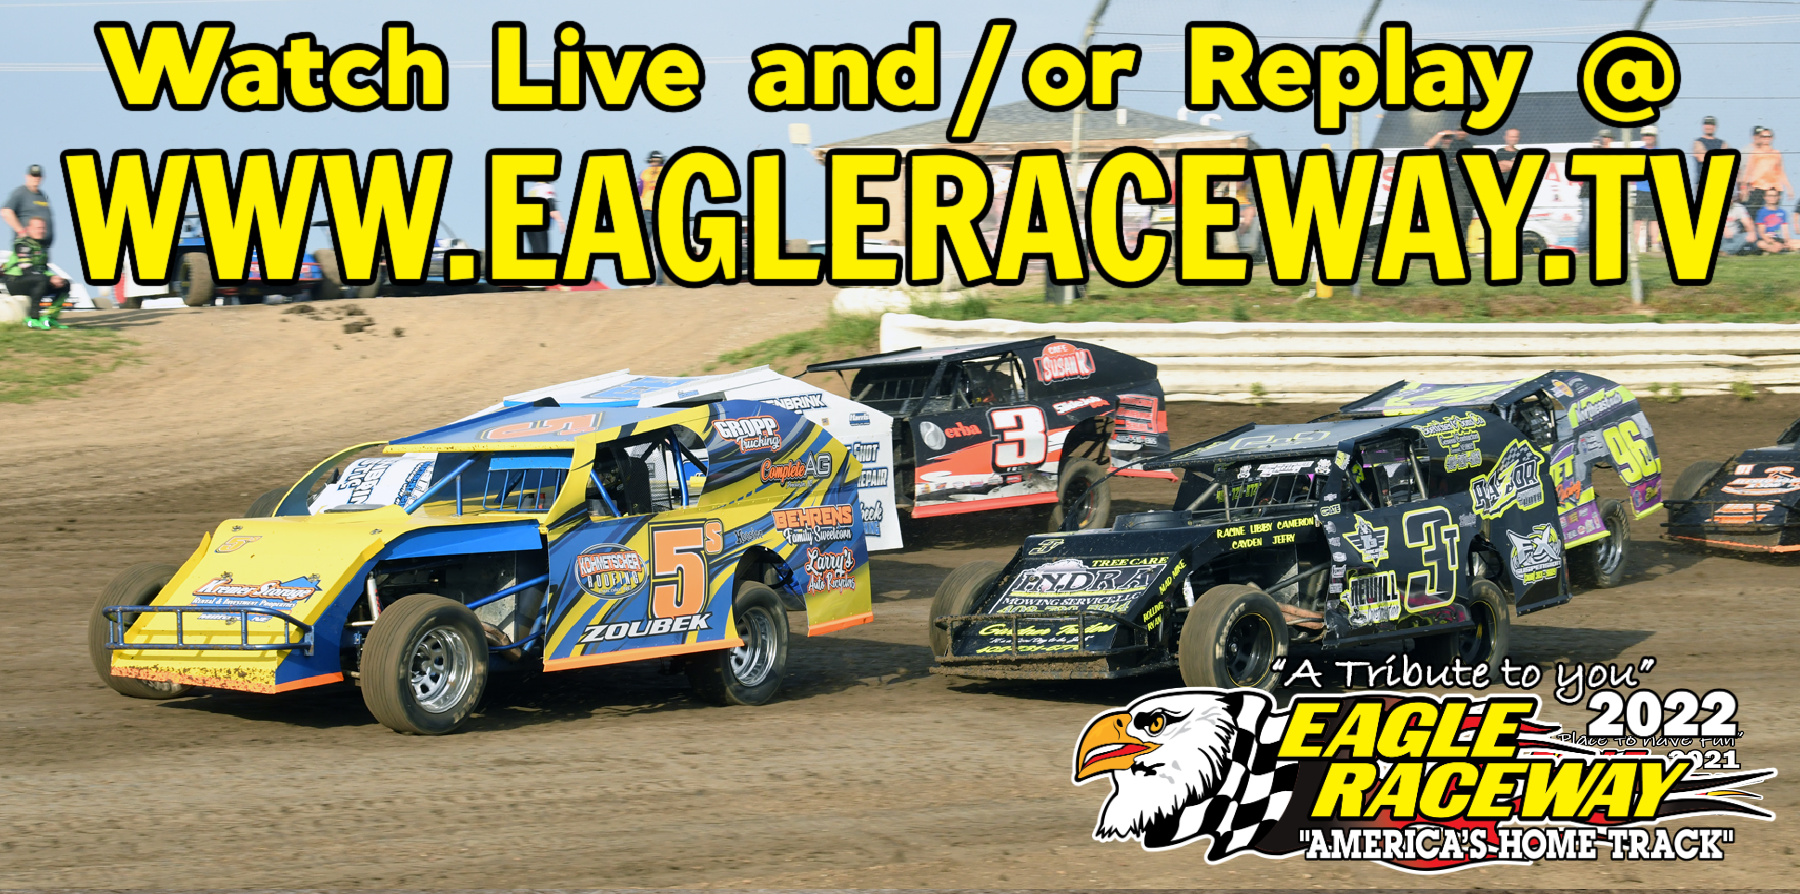 Races at Eagle Raceway will be available for Live Stream and Replay at www.eagleraceway all season